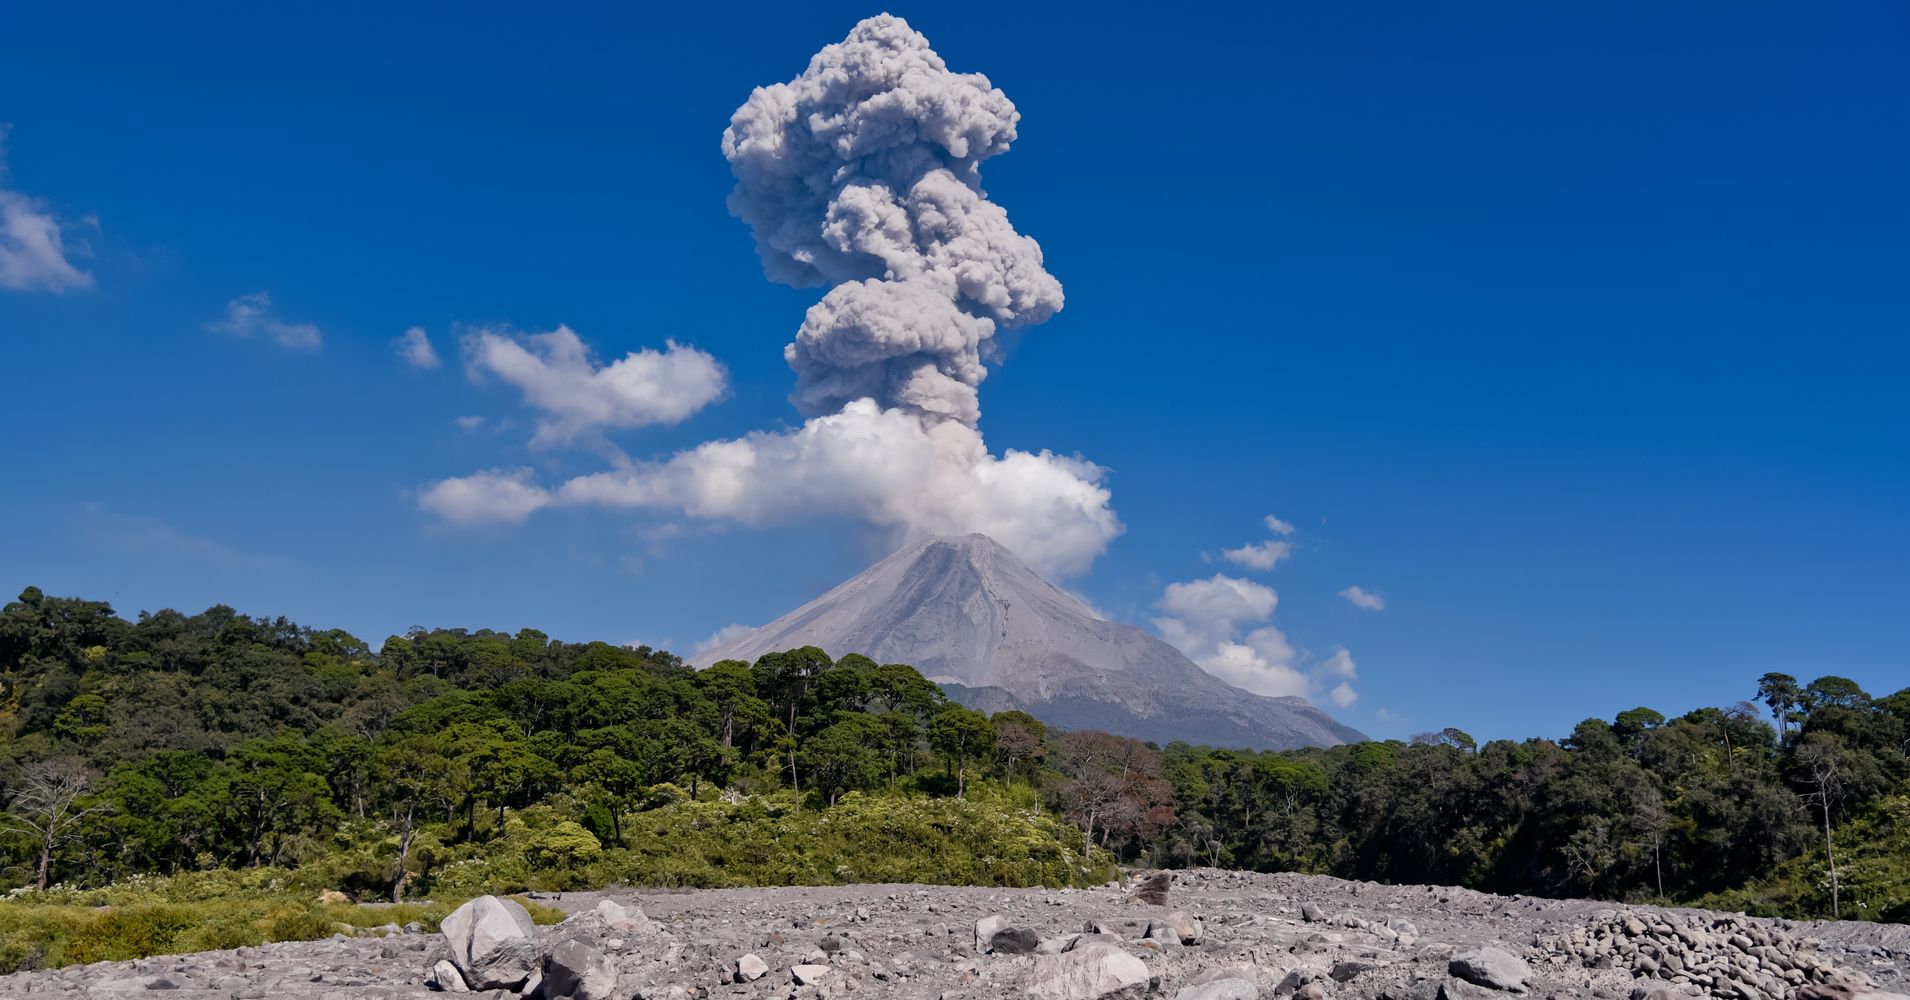 climate-change-could-trigger-more-volcanic-eruptions-study-finds